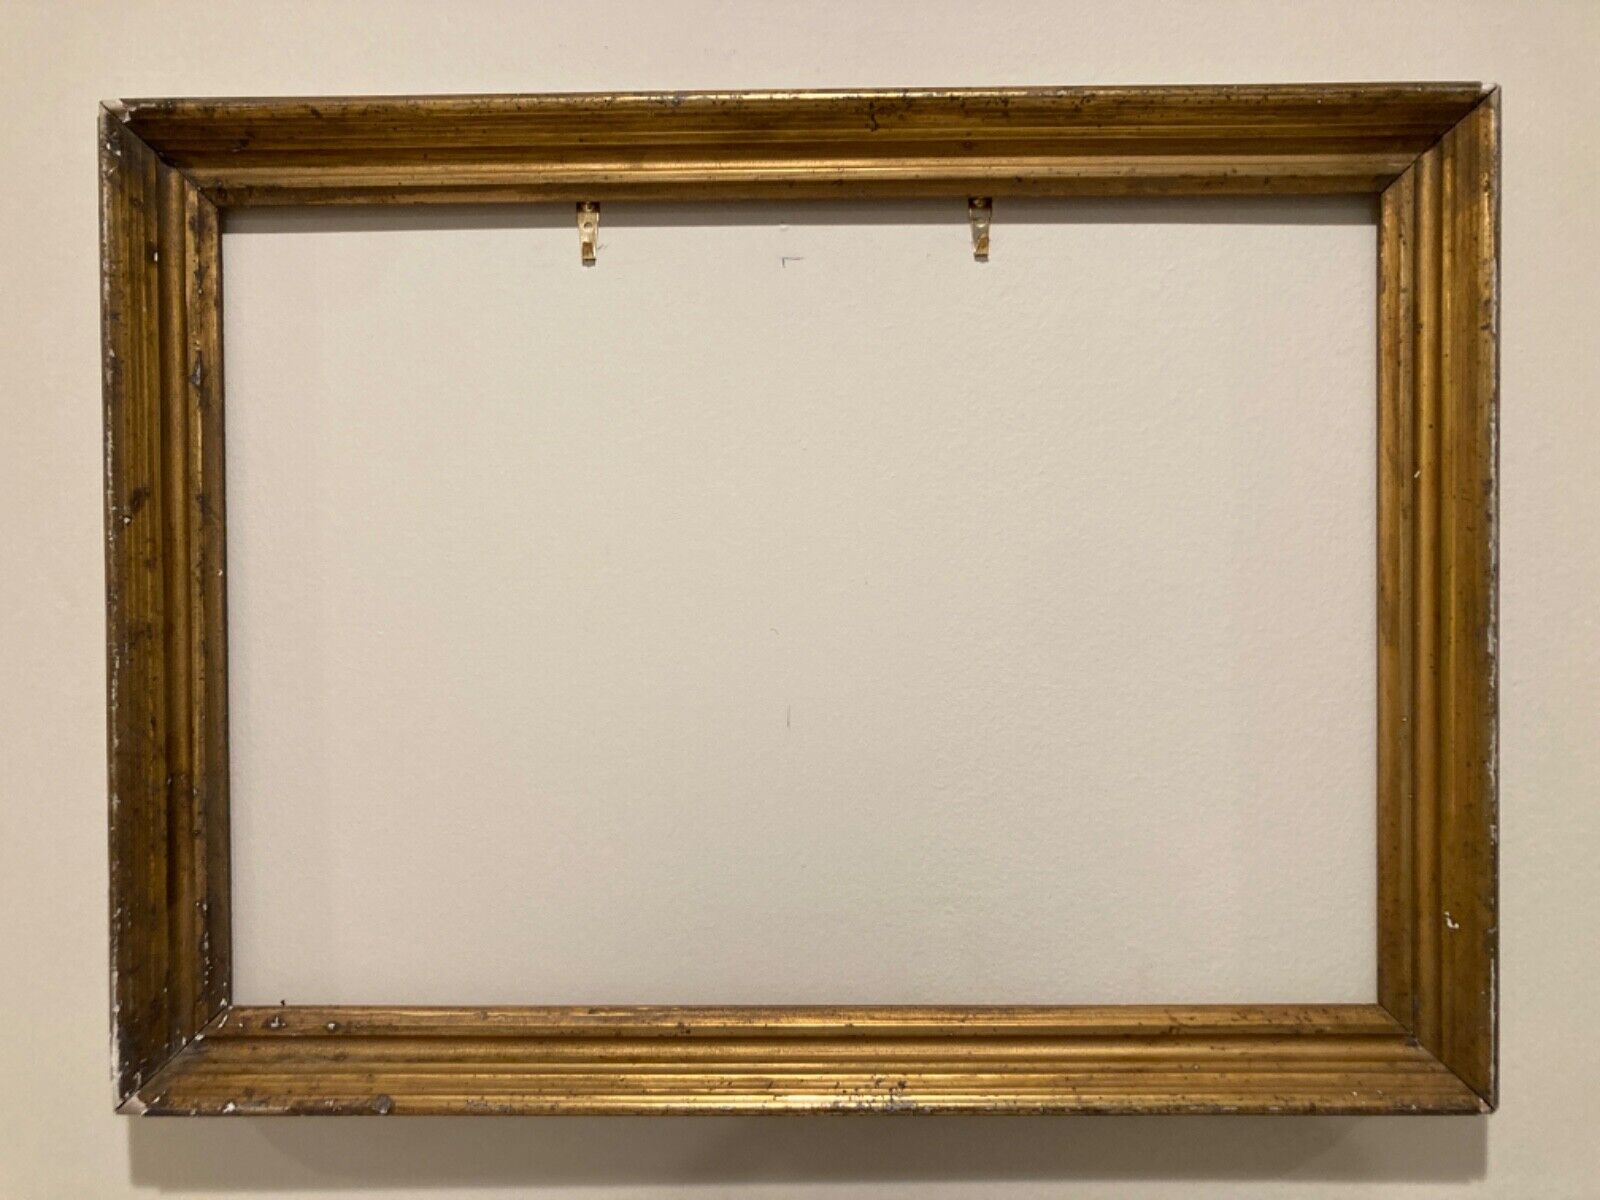 Antique 20x14 Gold Leaf Gilt Picture Frame 1890s 19th Century b